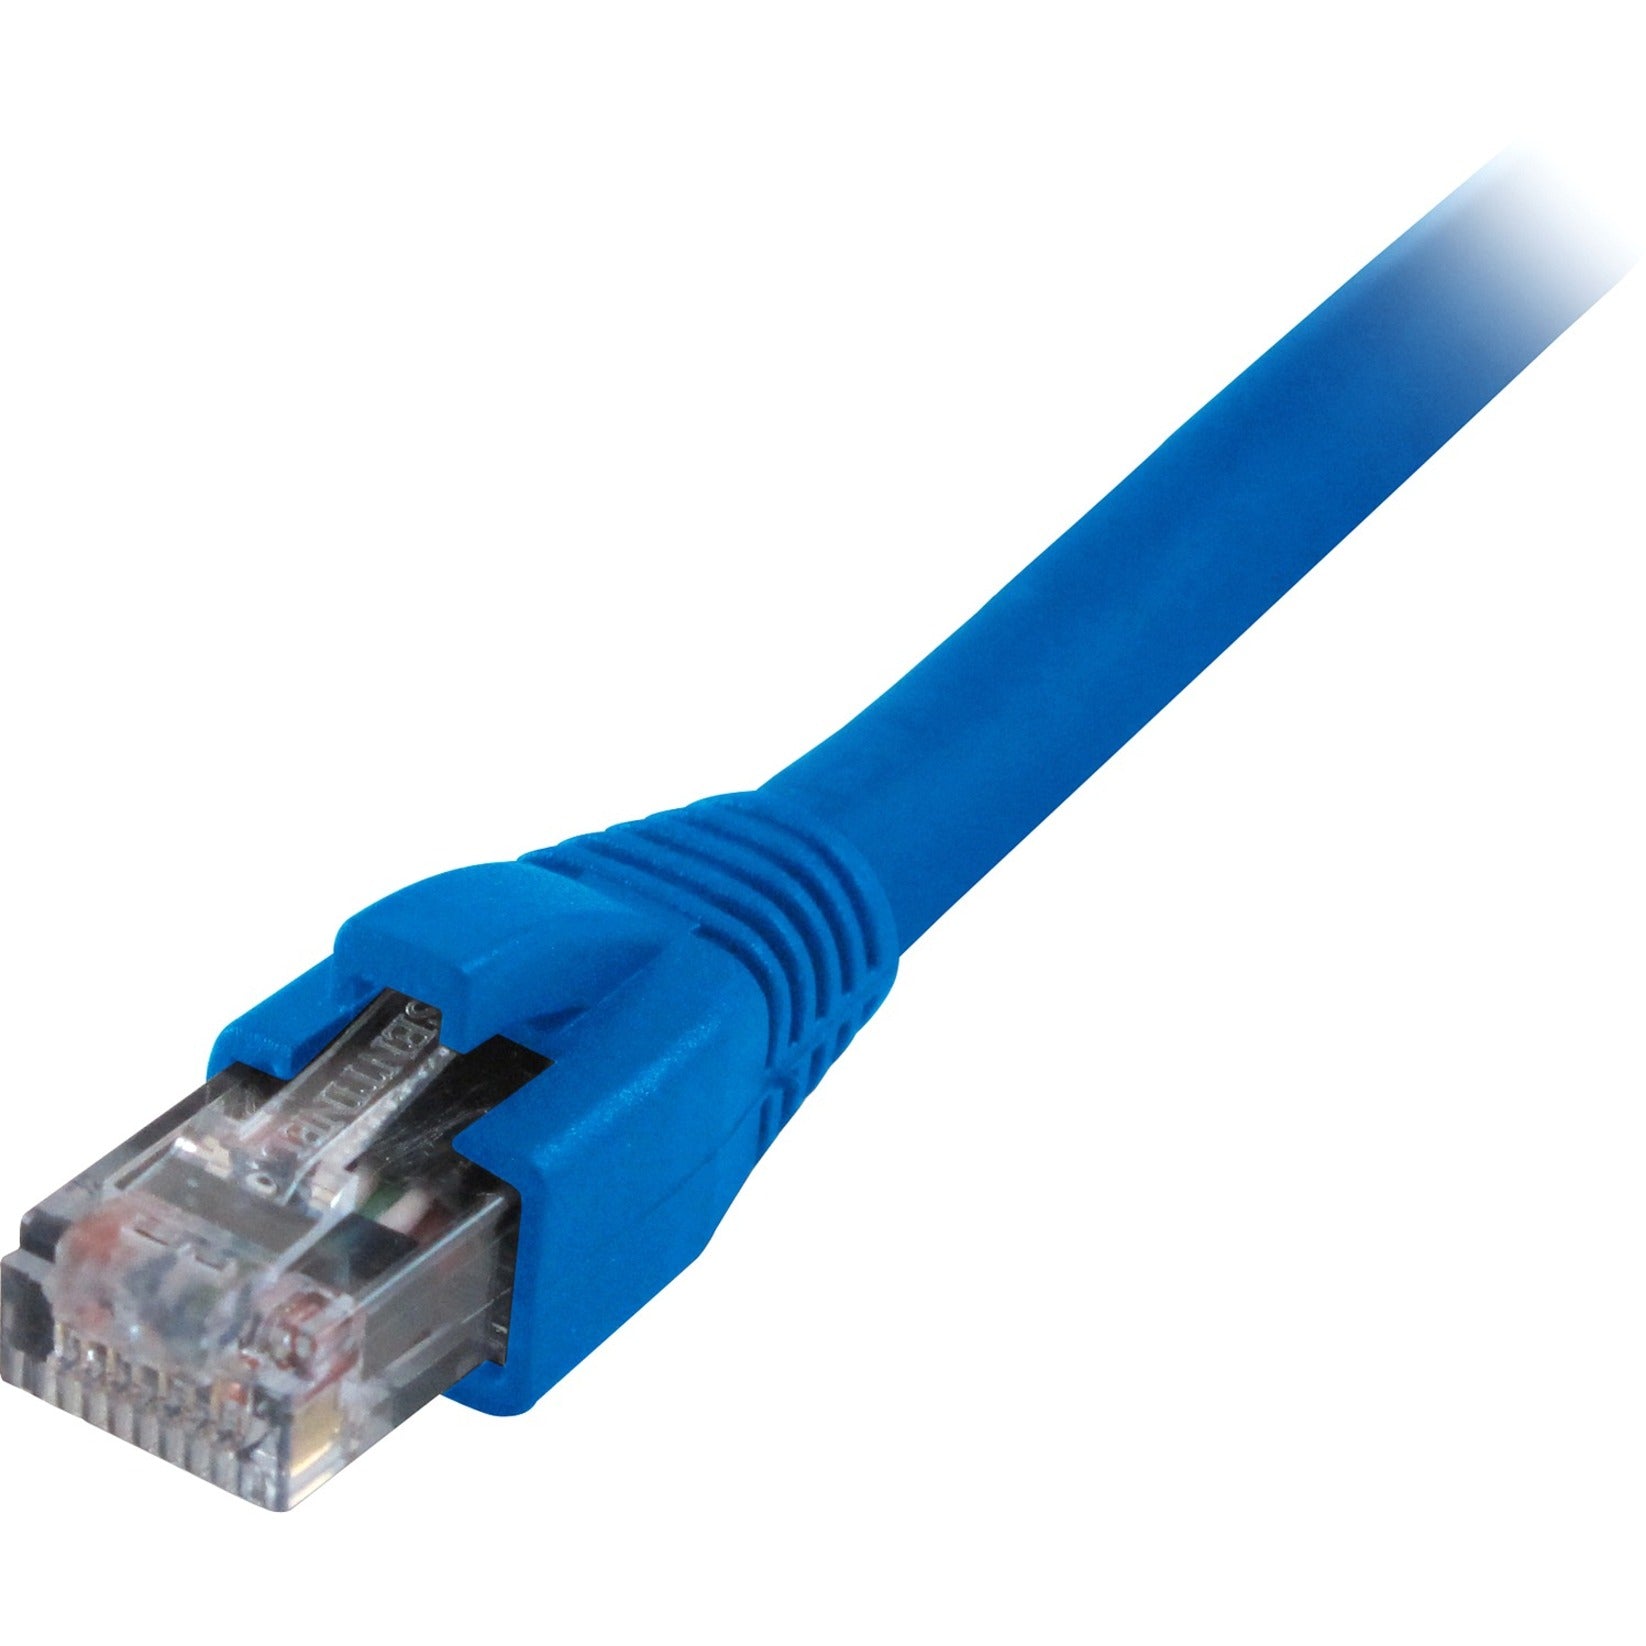 Comprehensive CAT5-350-25BLU Cat5e 350 Mhz Snagless Patch Cable 25ft Blue, Molded, Strain Relief, Stranded, Booted, 1 Gbit/s Data Transfer Rate